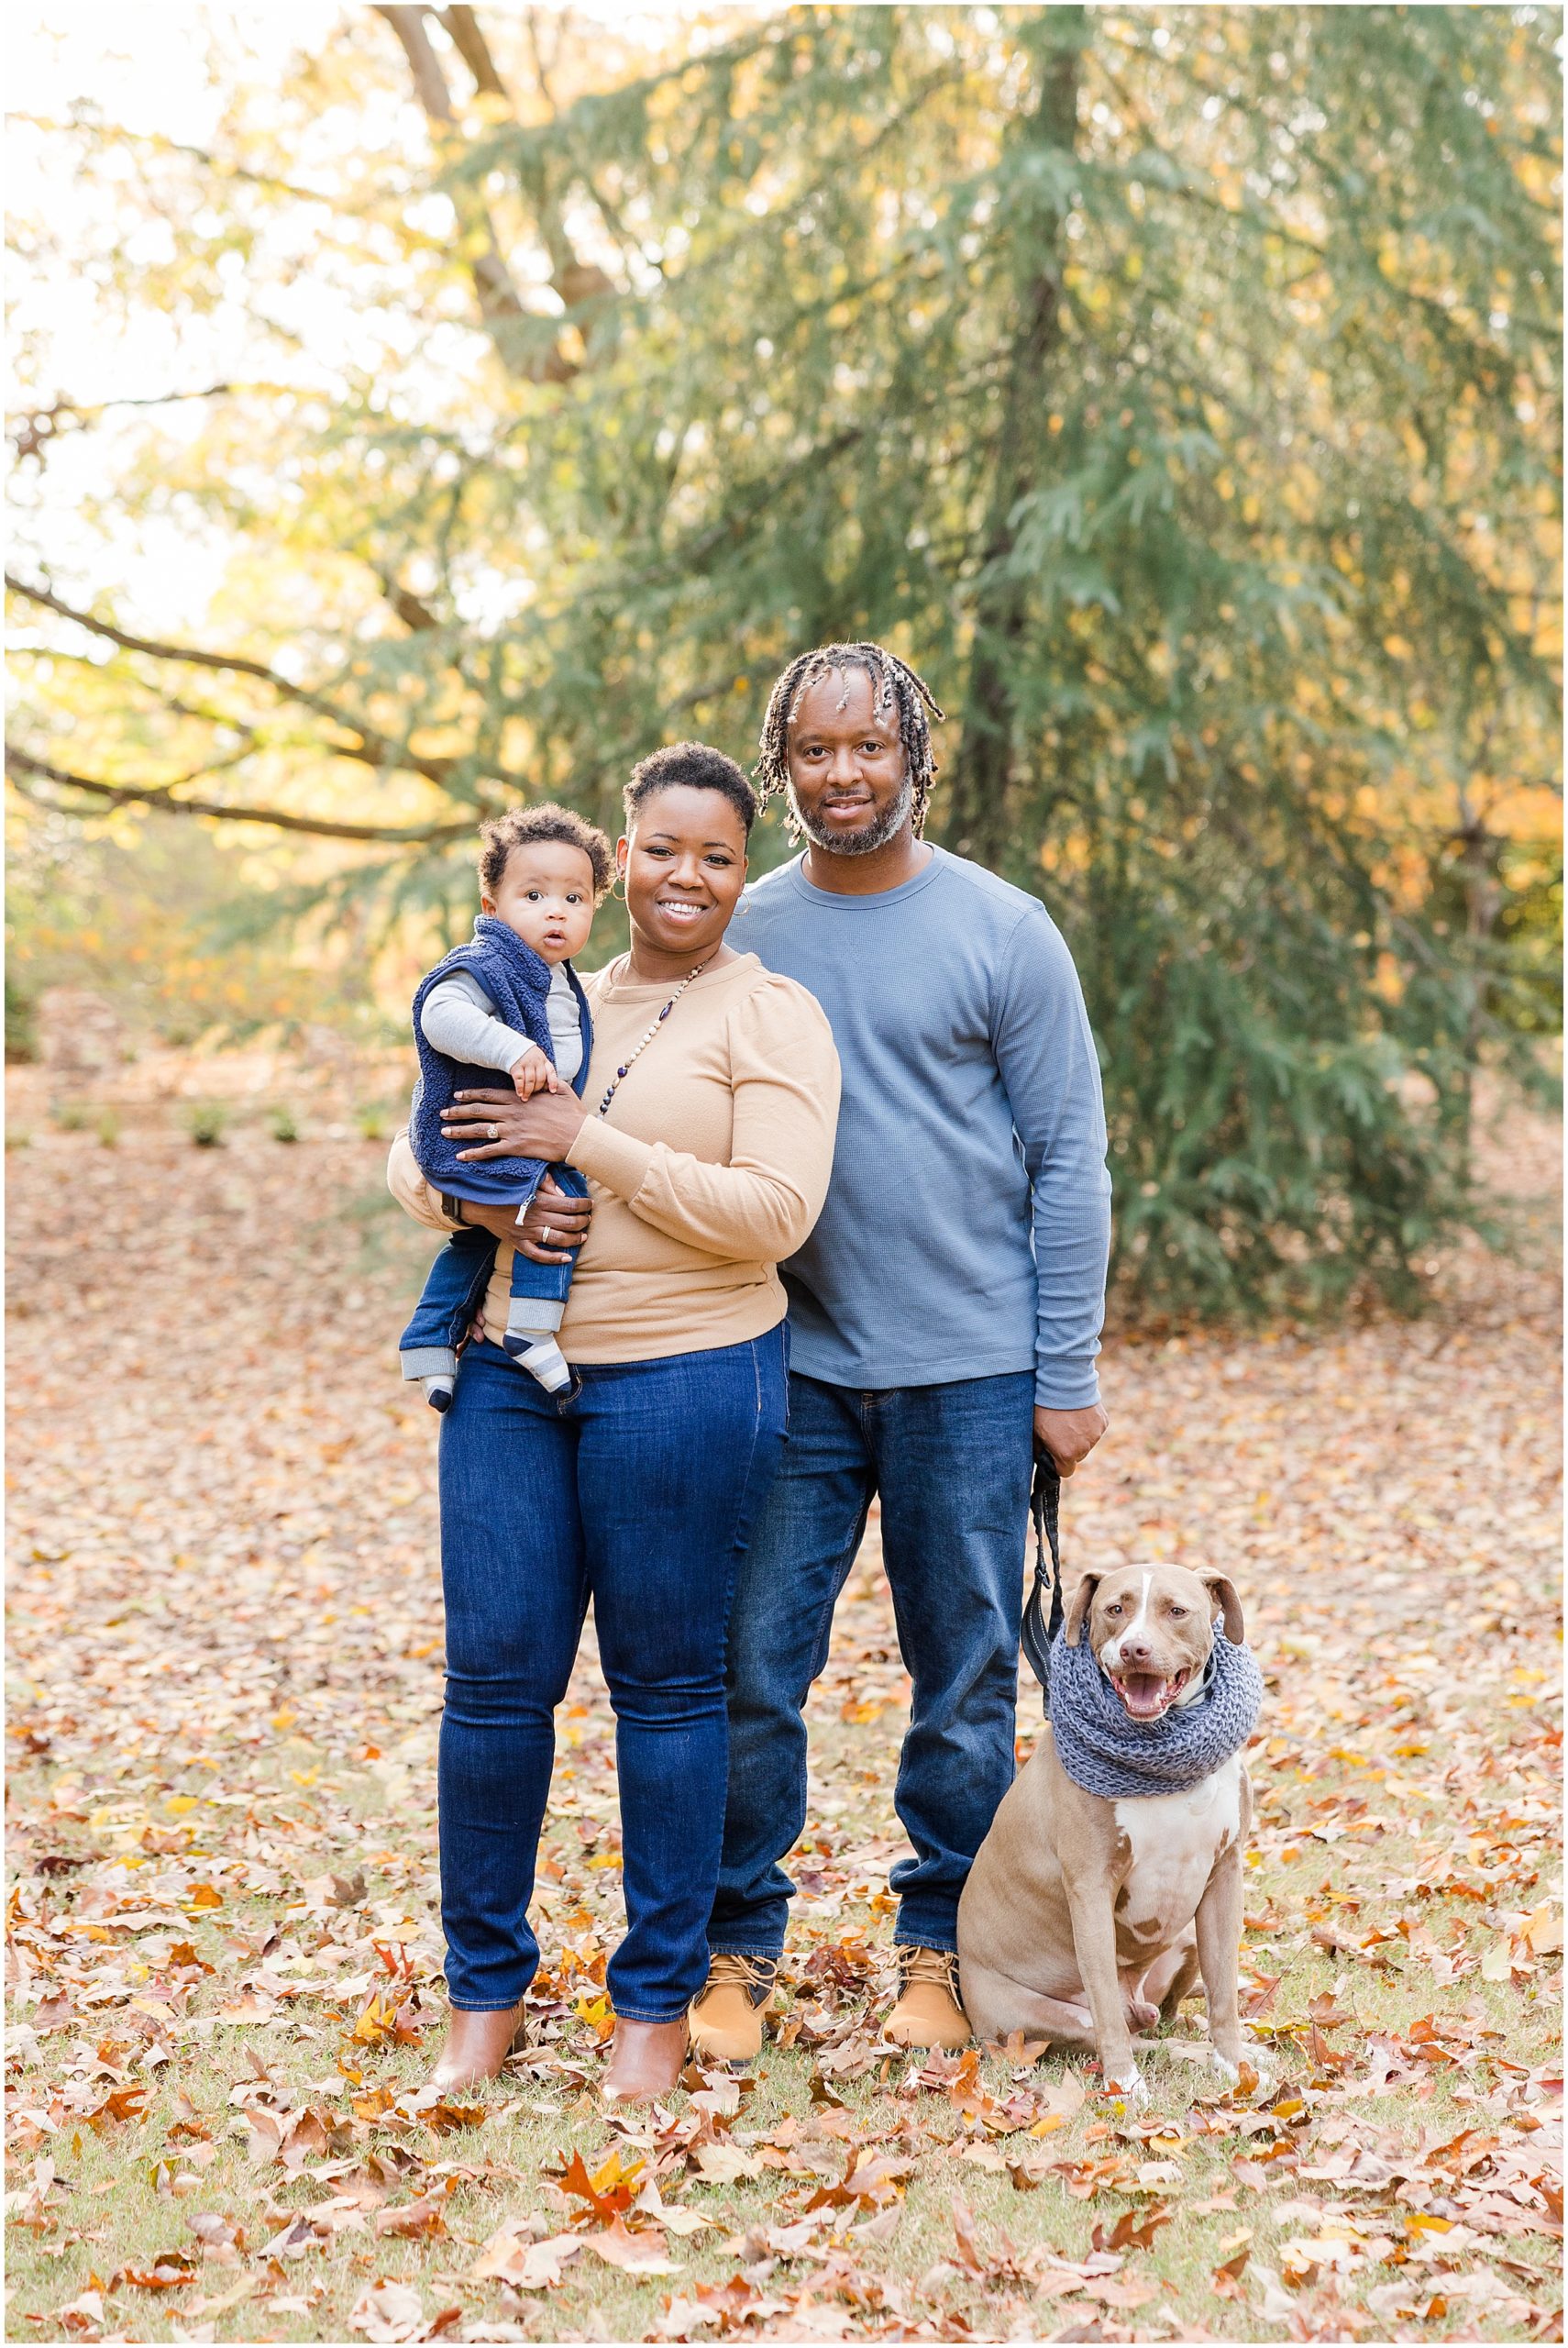 Black family photographer in Raleigh